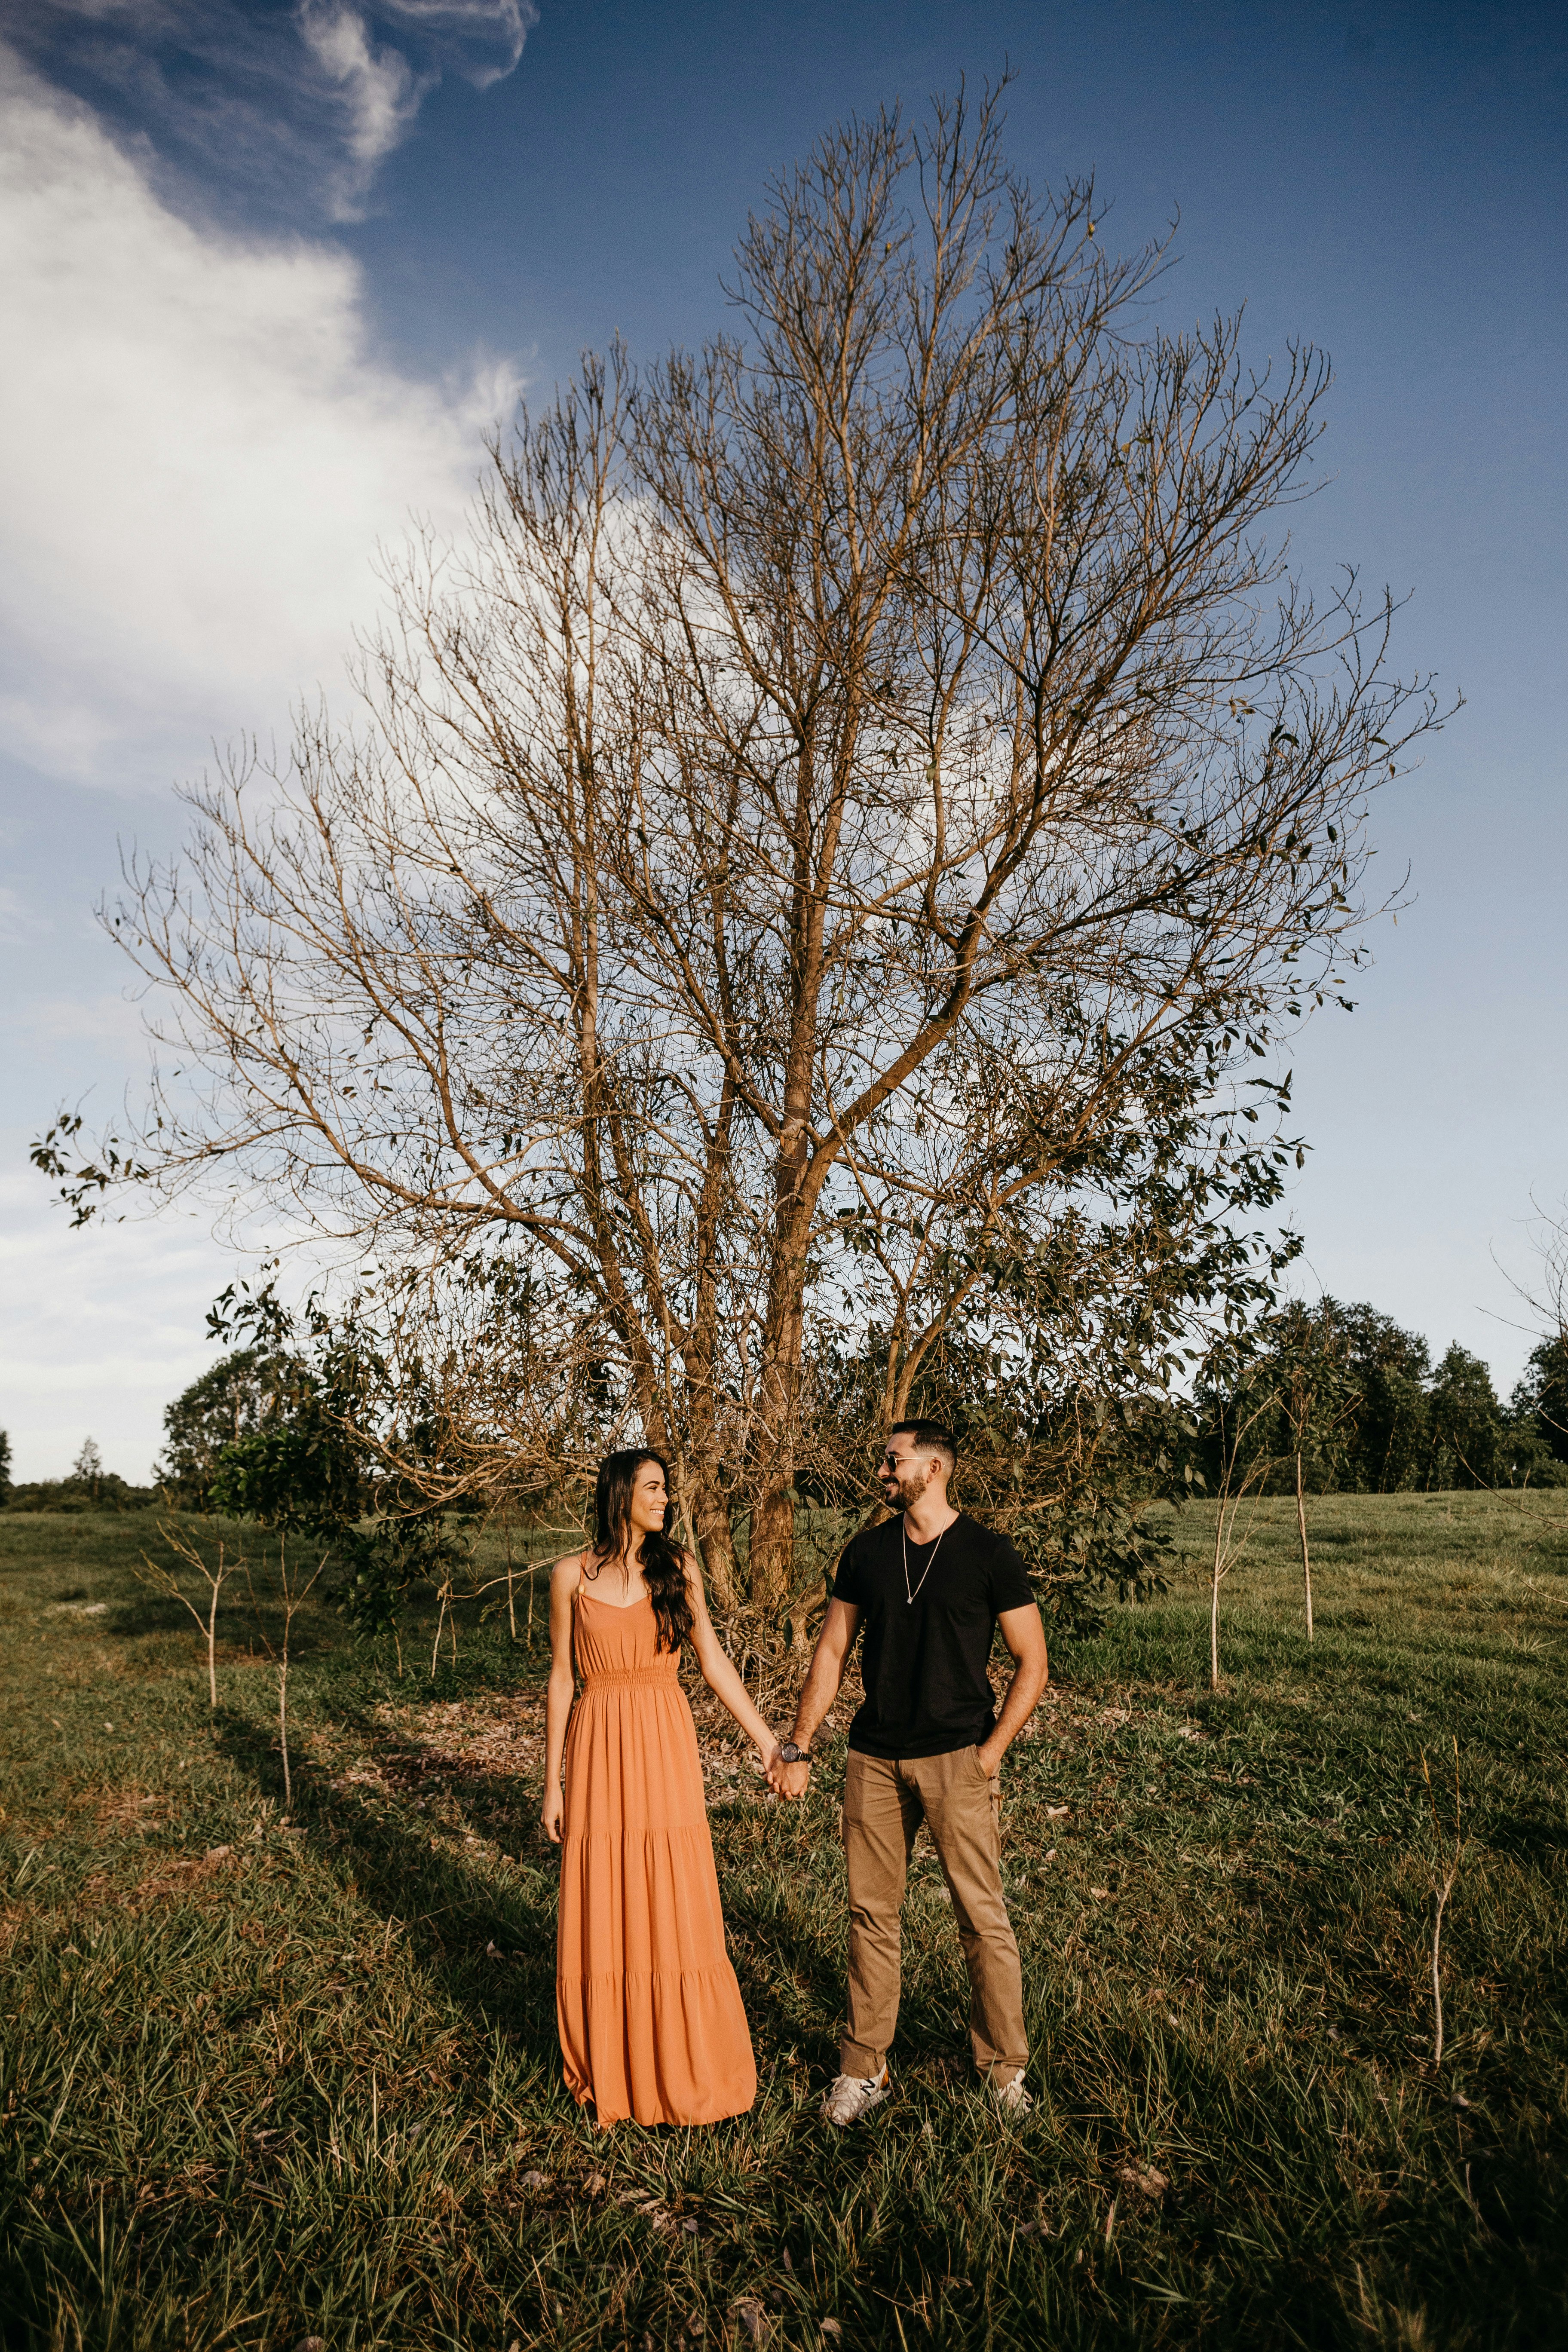 man and woman standing on green grass field near bare trees during daytime